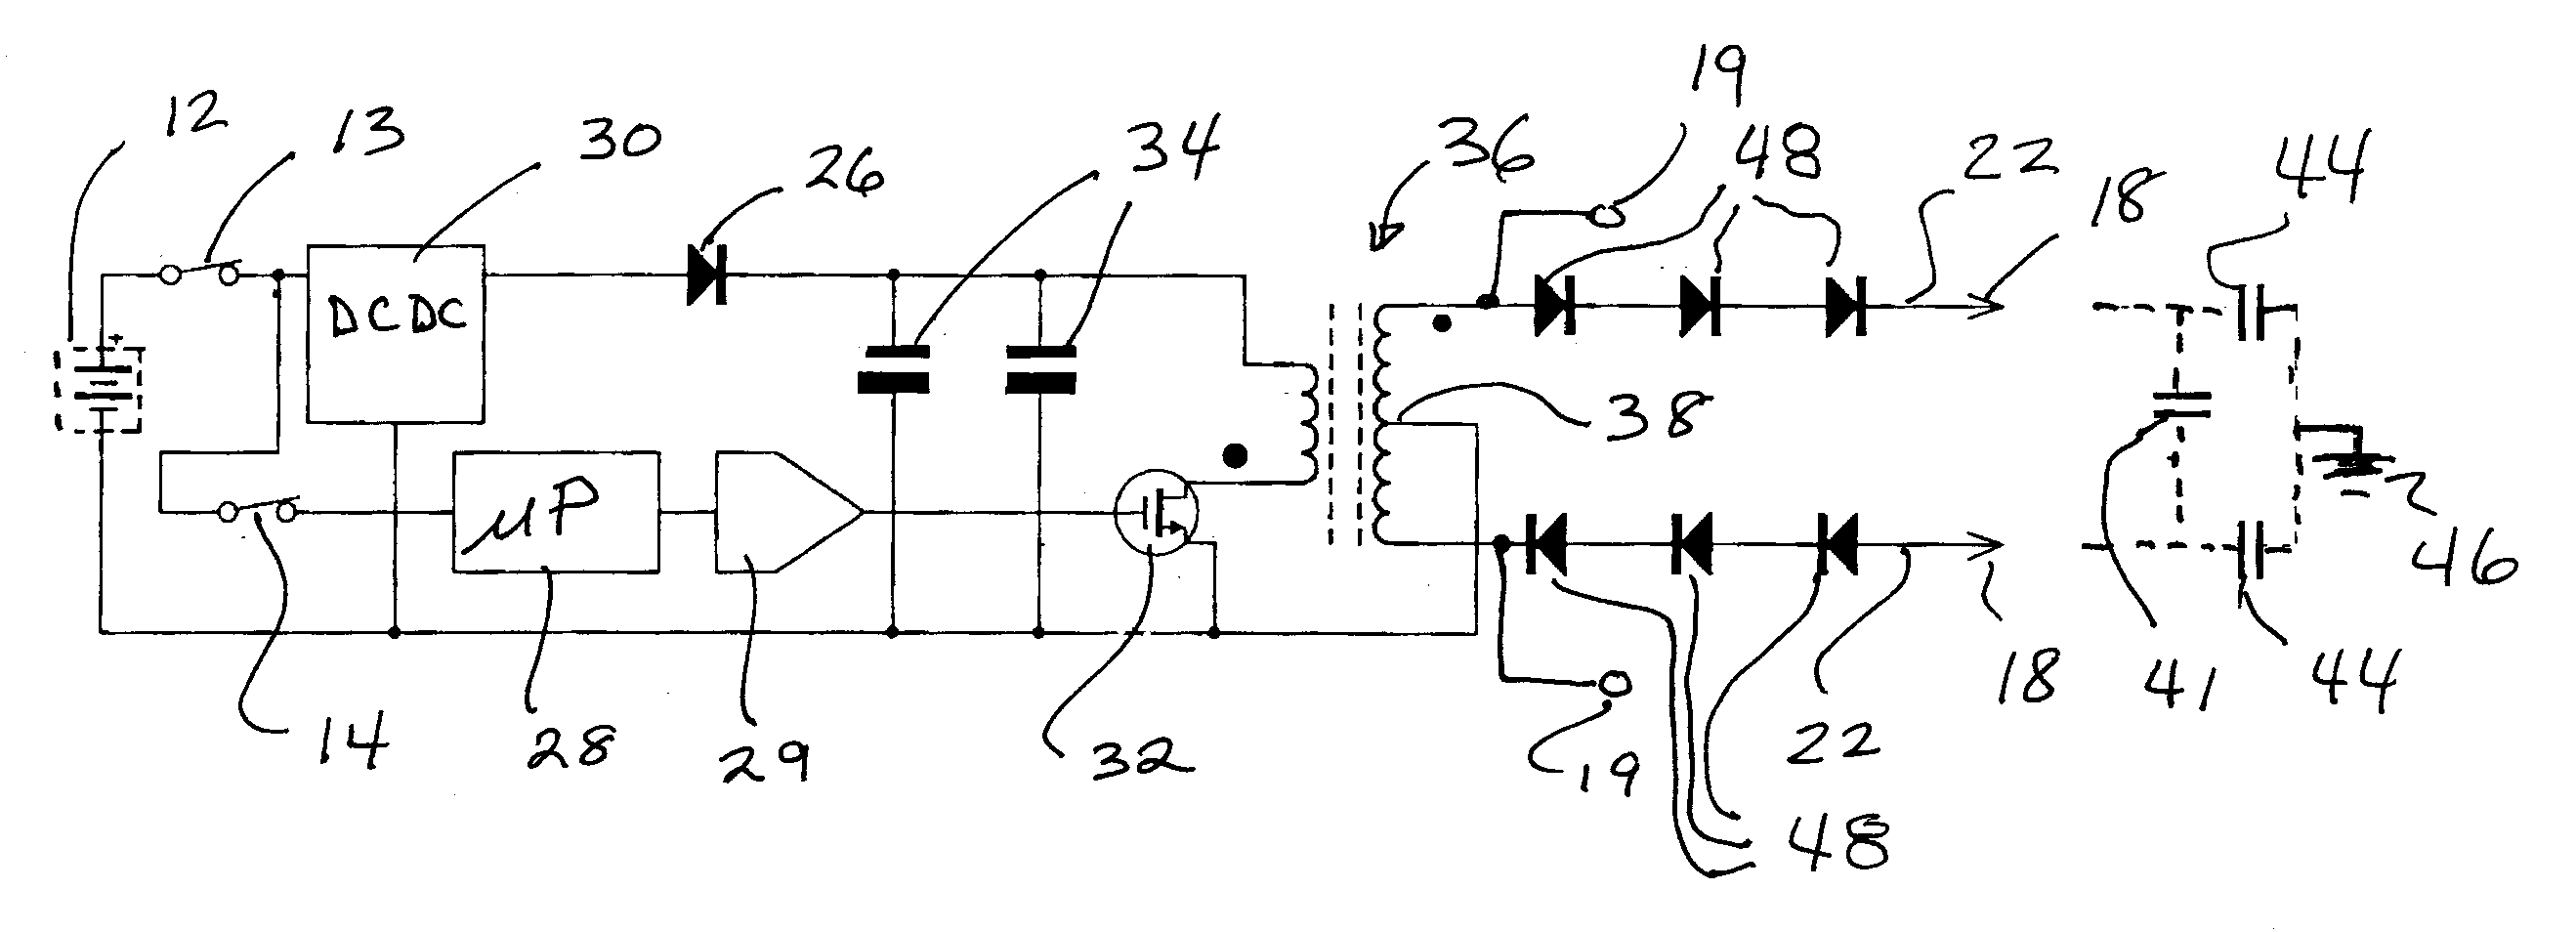 Electric Disabling Device with Controlled Immobilizing Pulse Widths